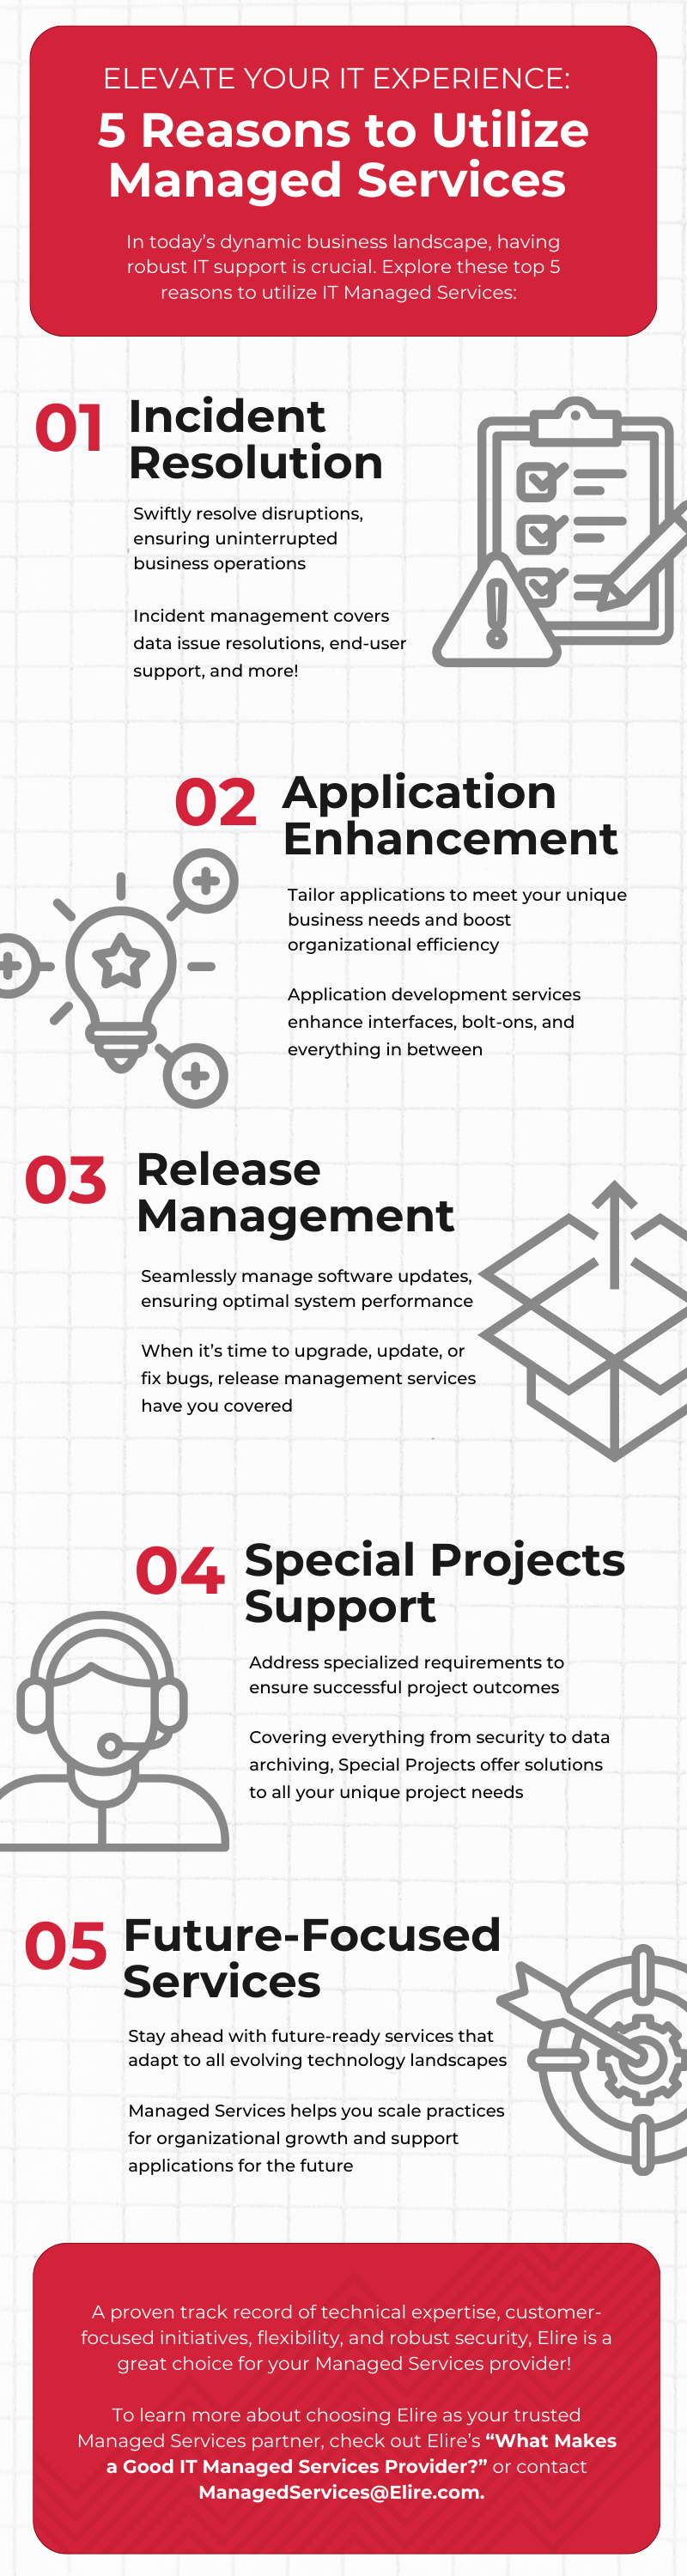 5 Reasons to Utilize IT Managed Services